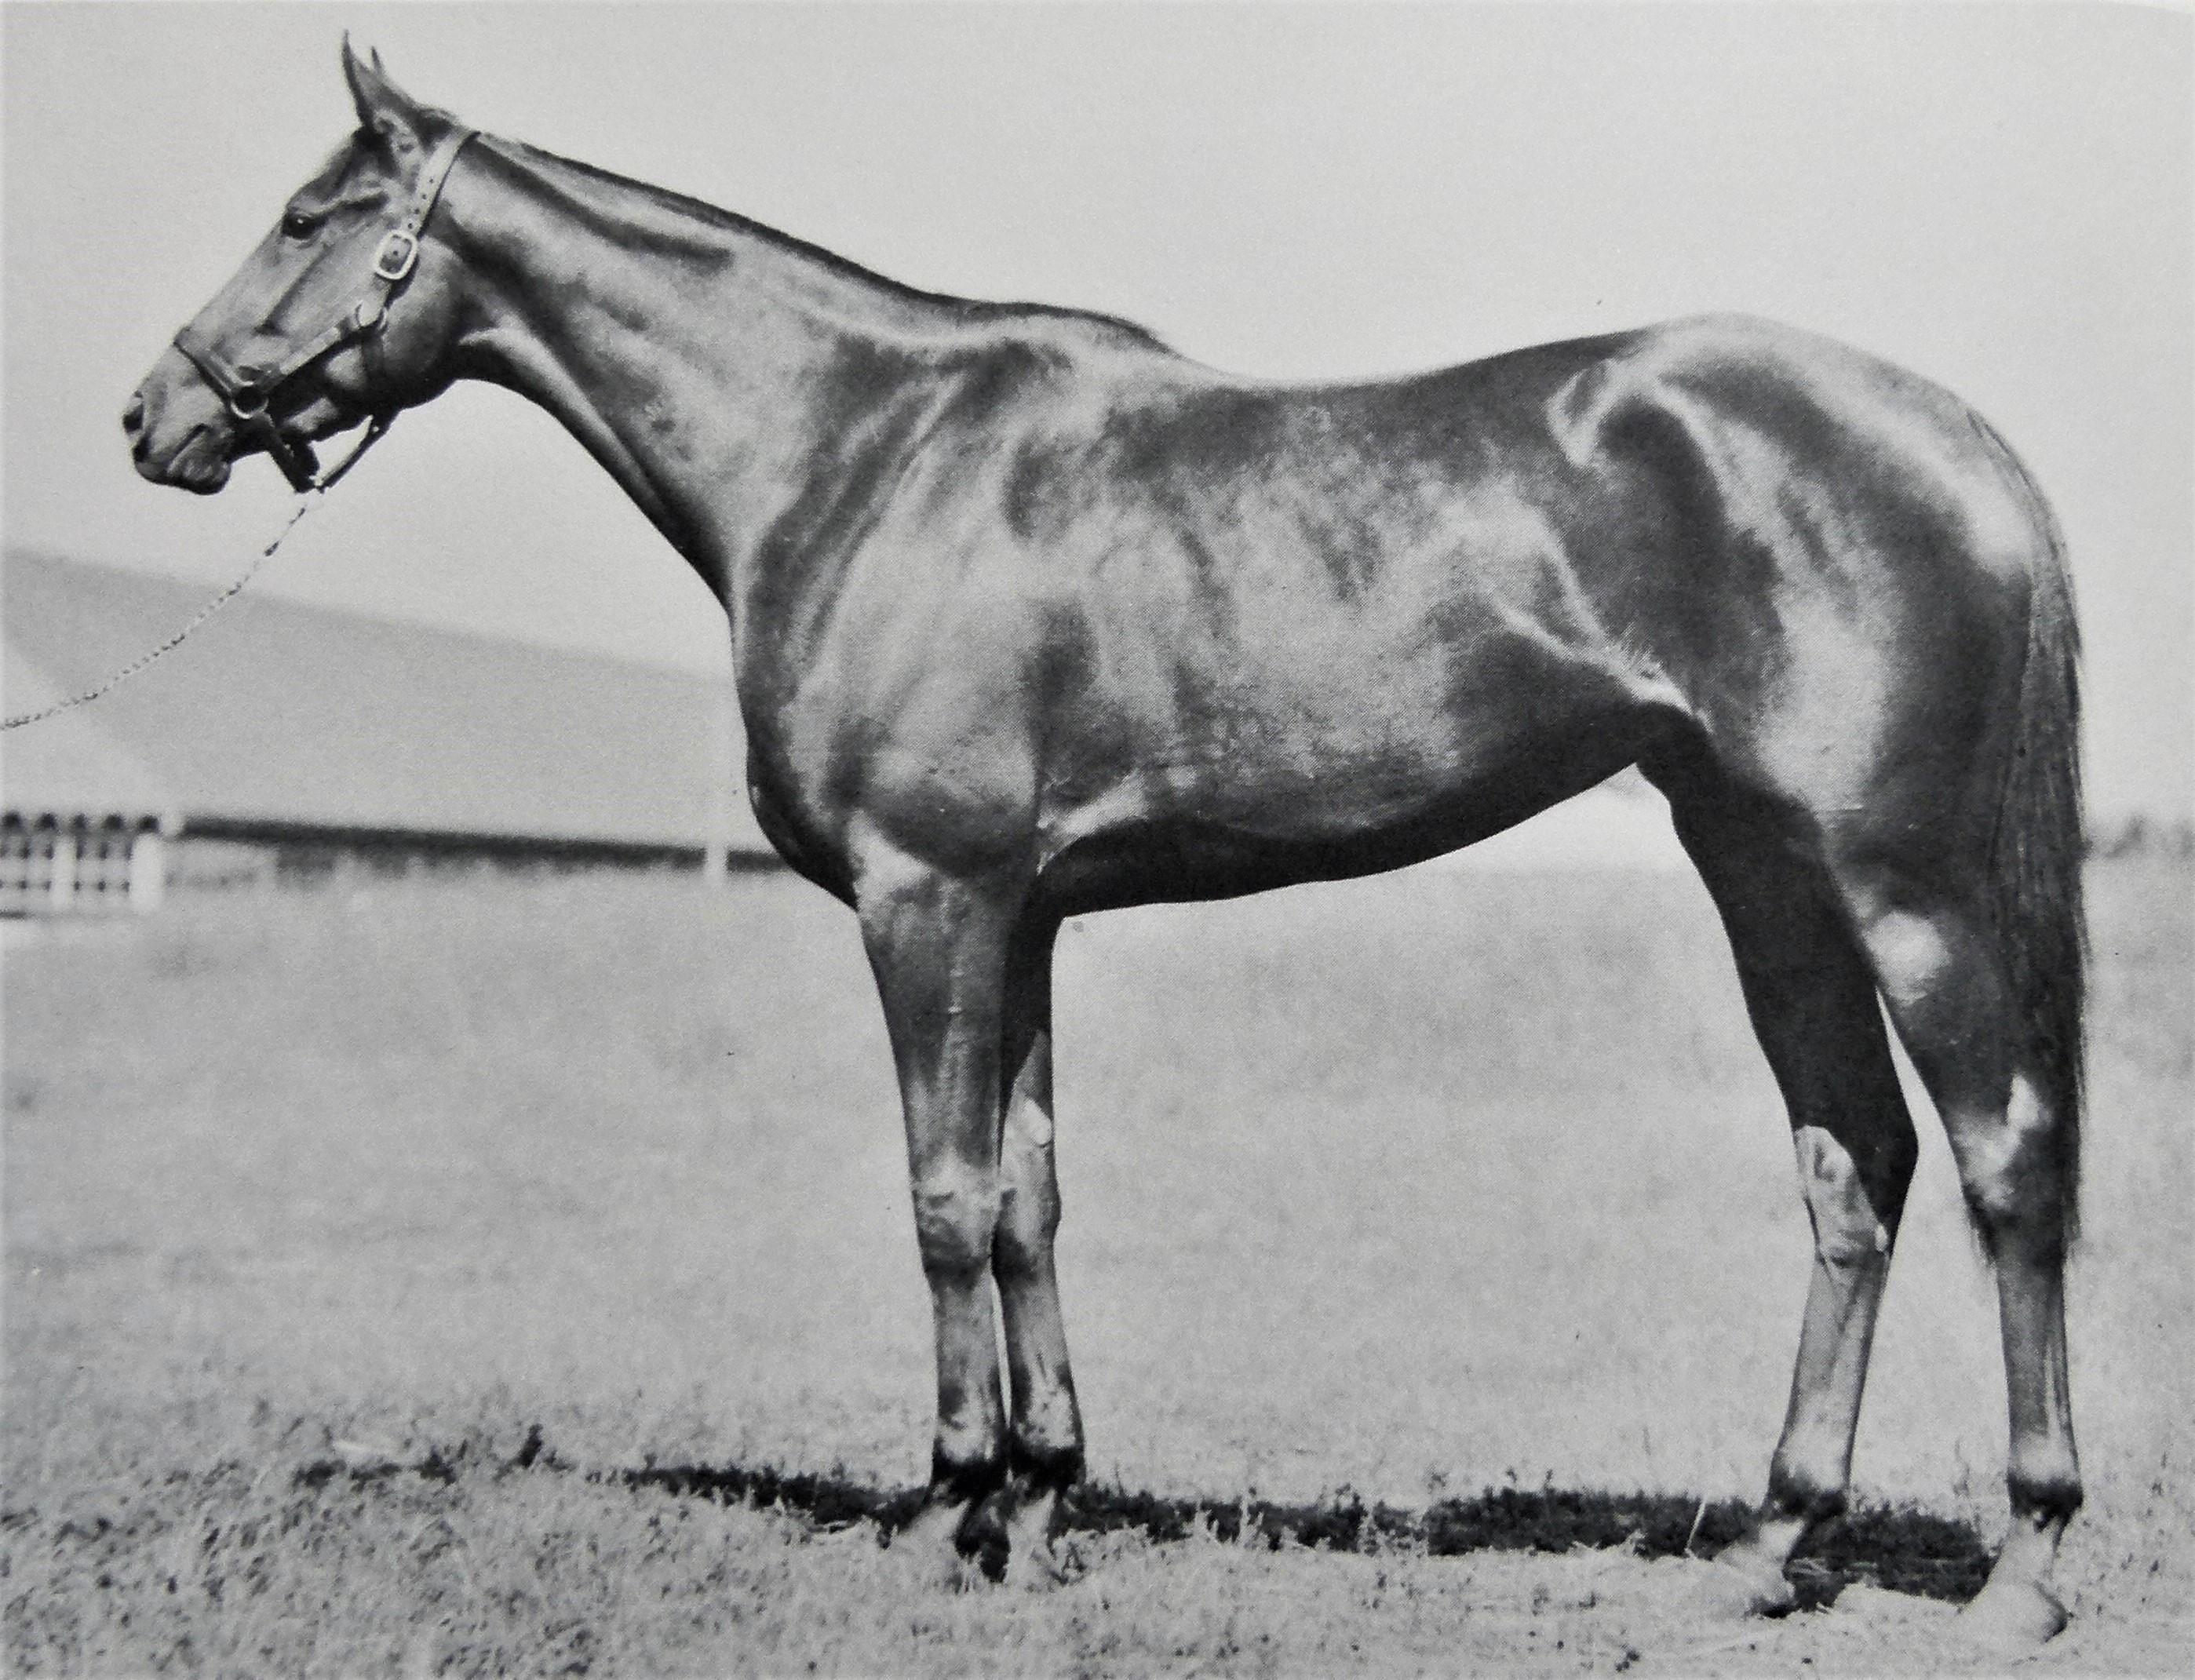 Wistful raced for five seasons, running 51 times in all. After her triumphant 3-year-old year, she continued to be campaigned extensively but never again reached those heights